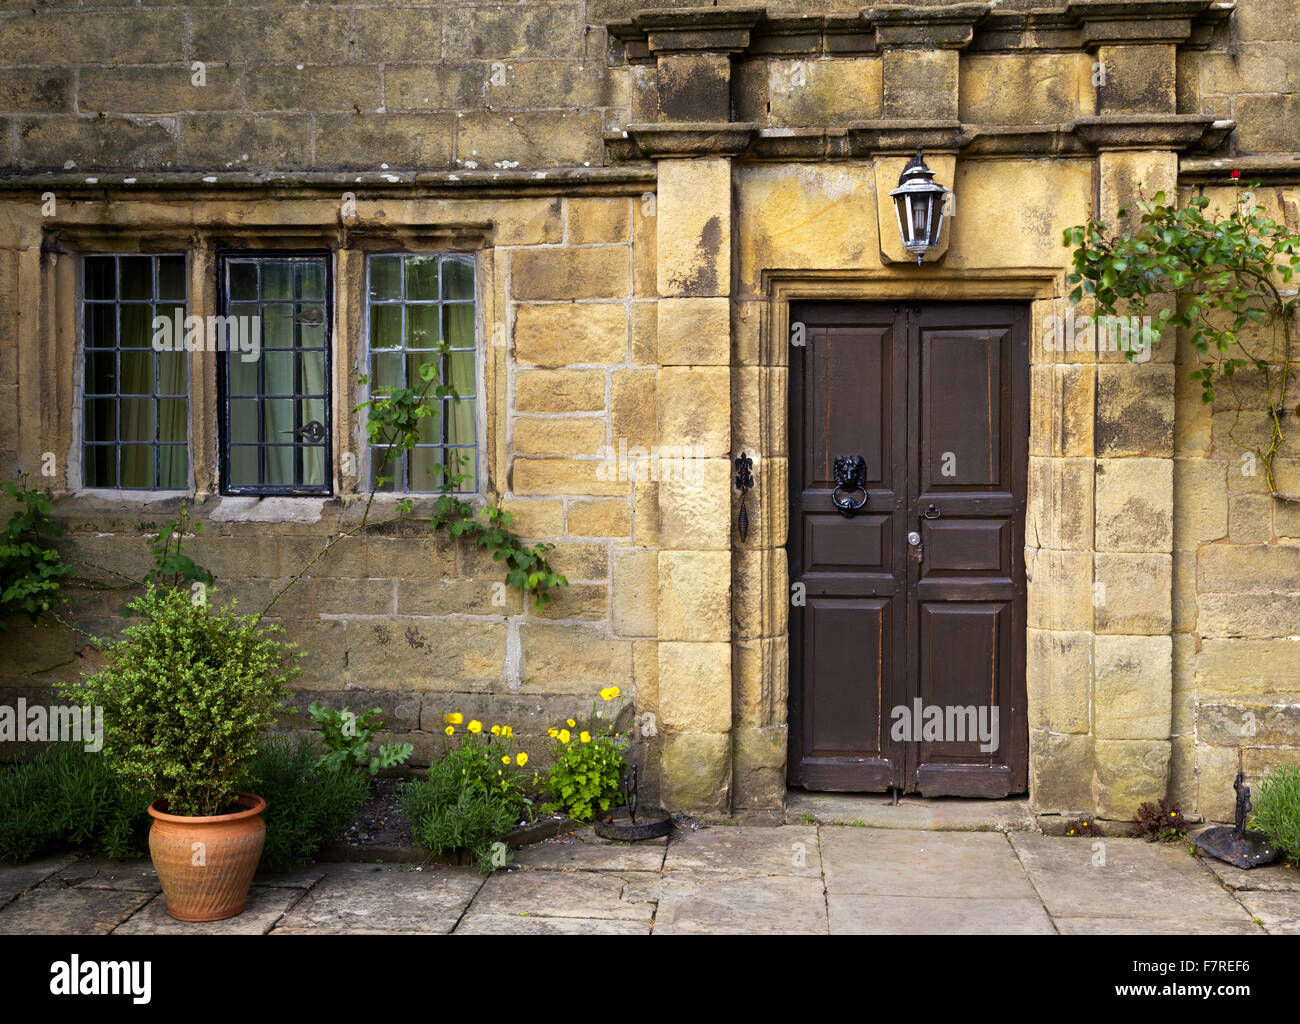 The front of Eyam Hall and Craft Centre, Derbyshire. Eyam Hall is an unspoilt example of a gritstone Jacobean manor house, set within a walled garden. Stock Photo